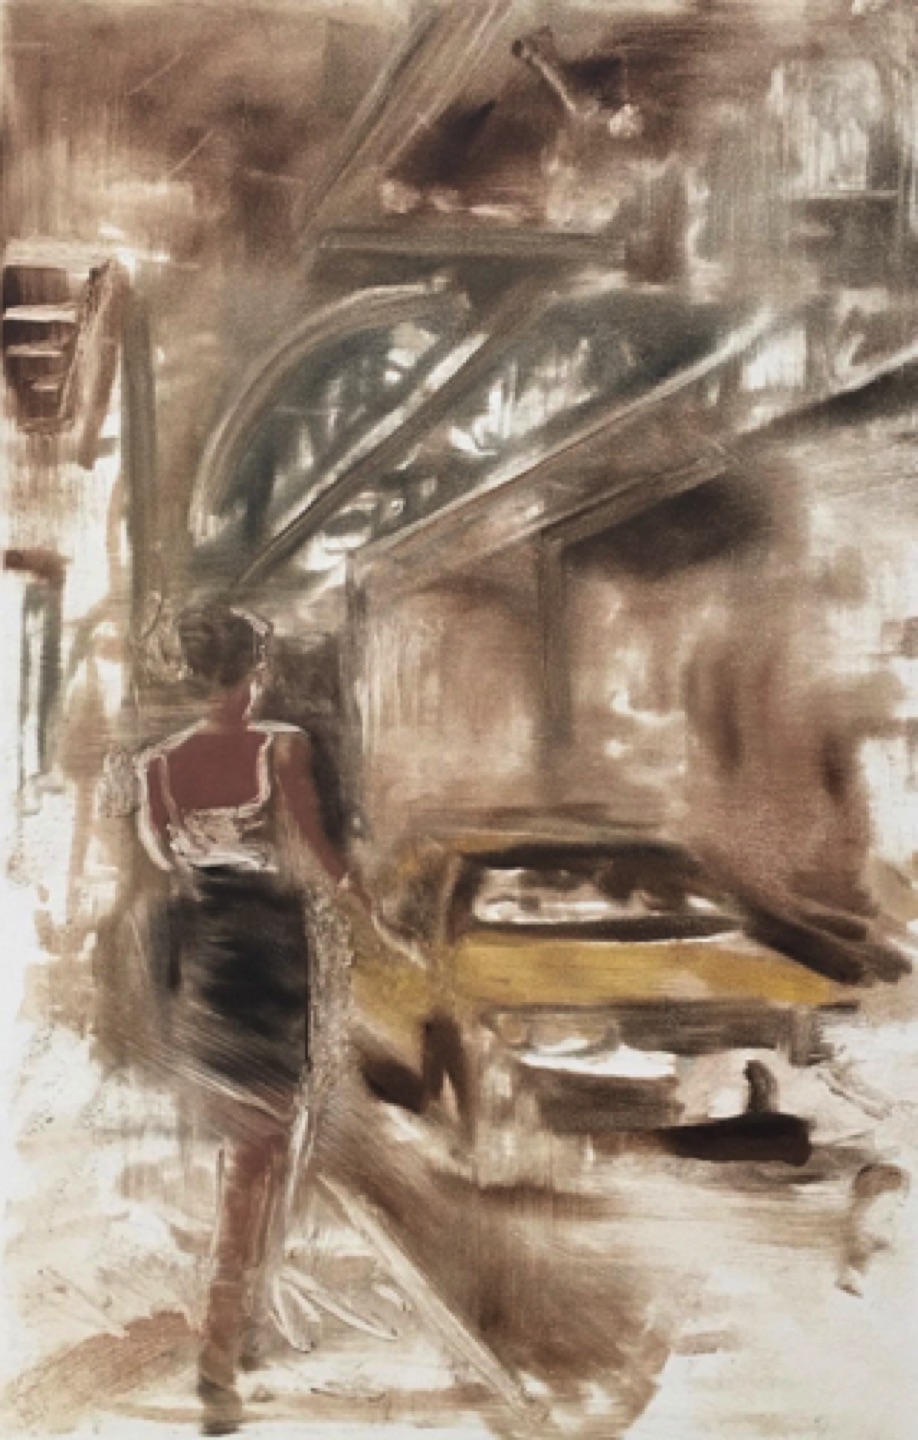 Gregg Chadwick
Chicago: Under the El
30”x22” monotype on paper 2018